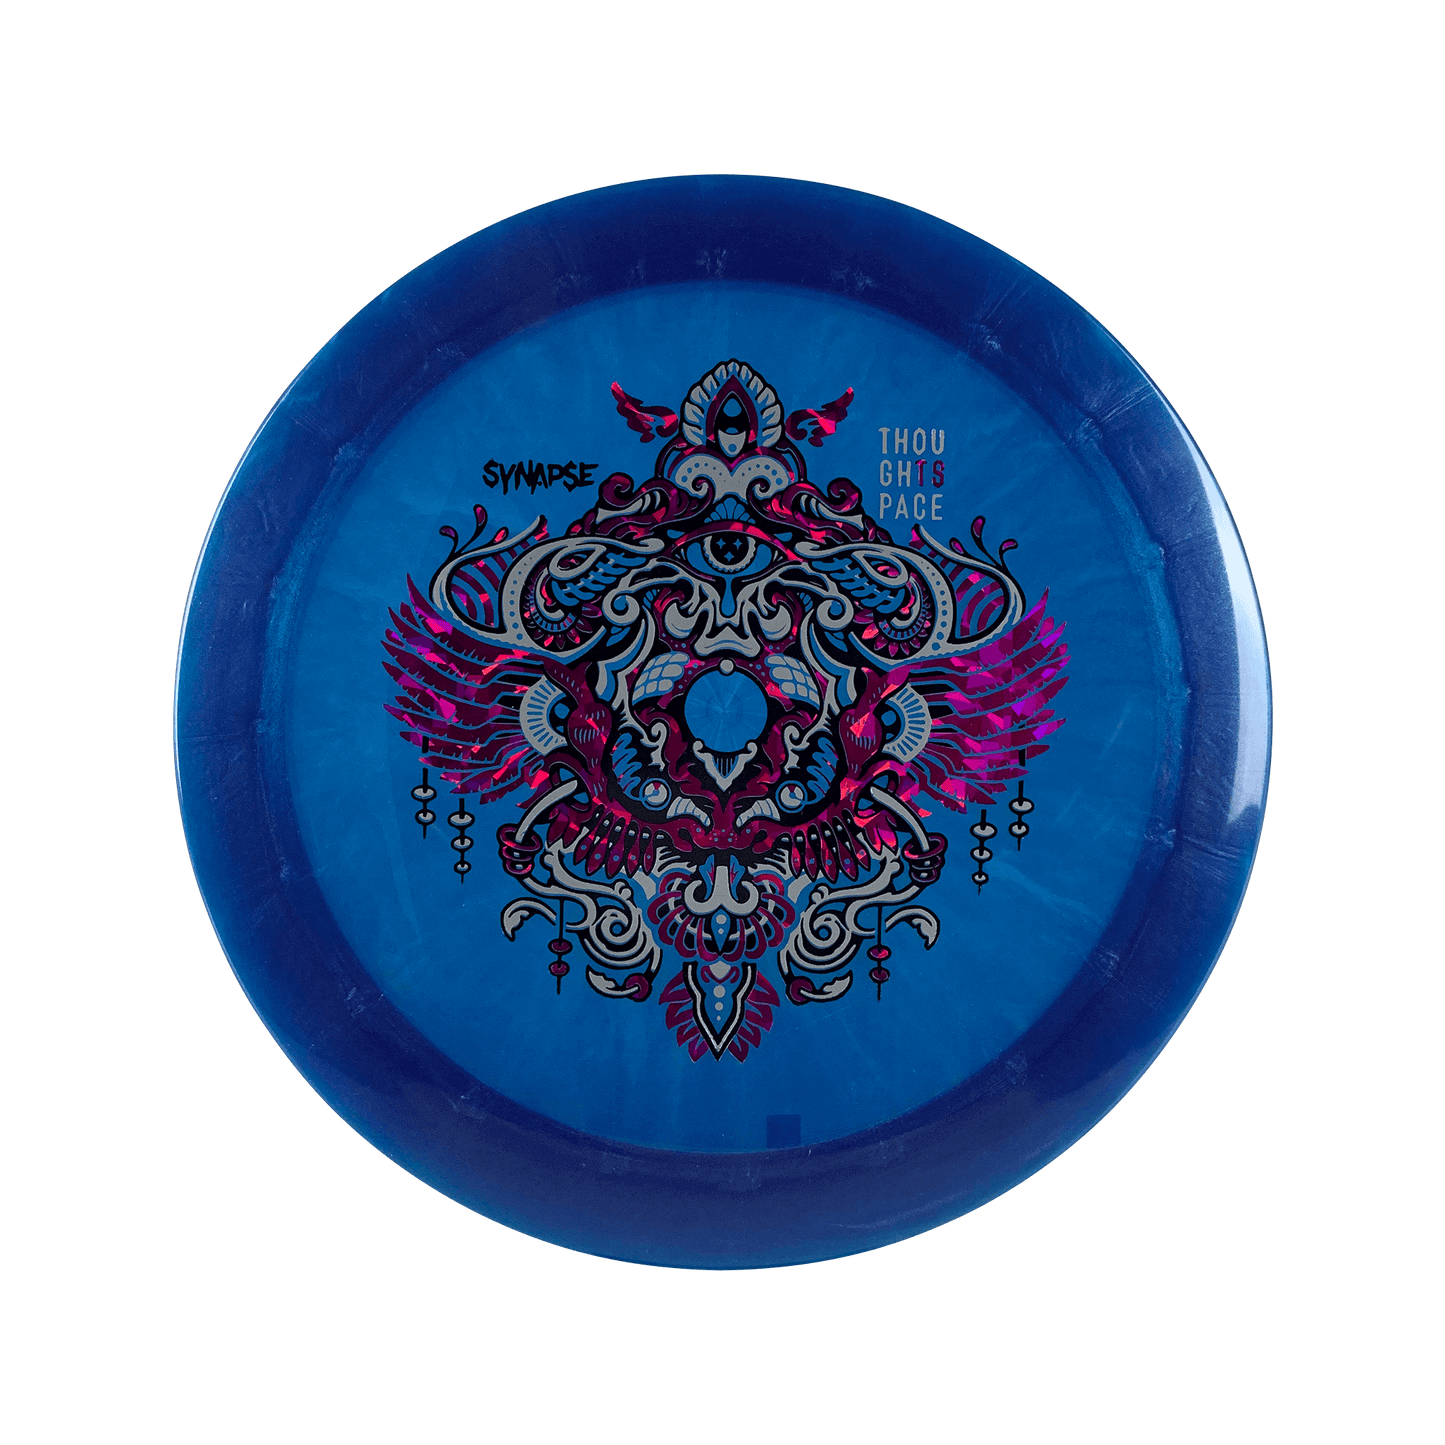 Aura Synapse Disc Thought Space Athletics blue 174 